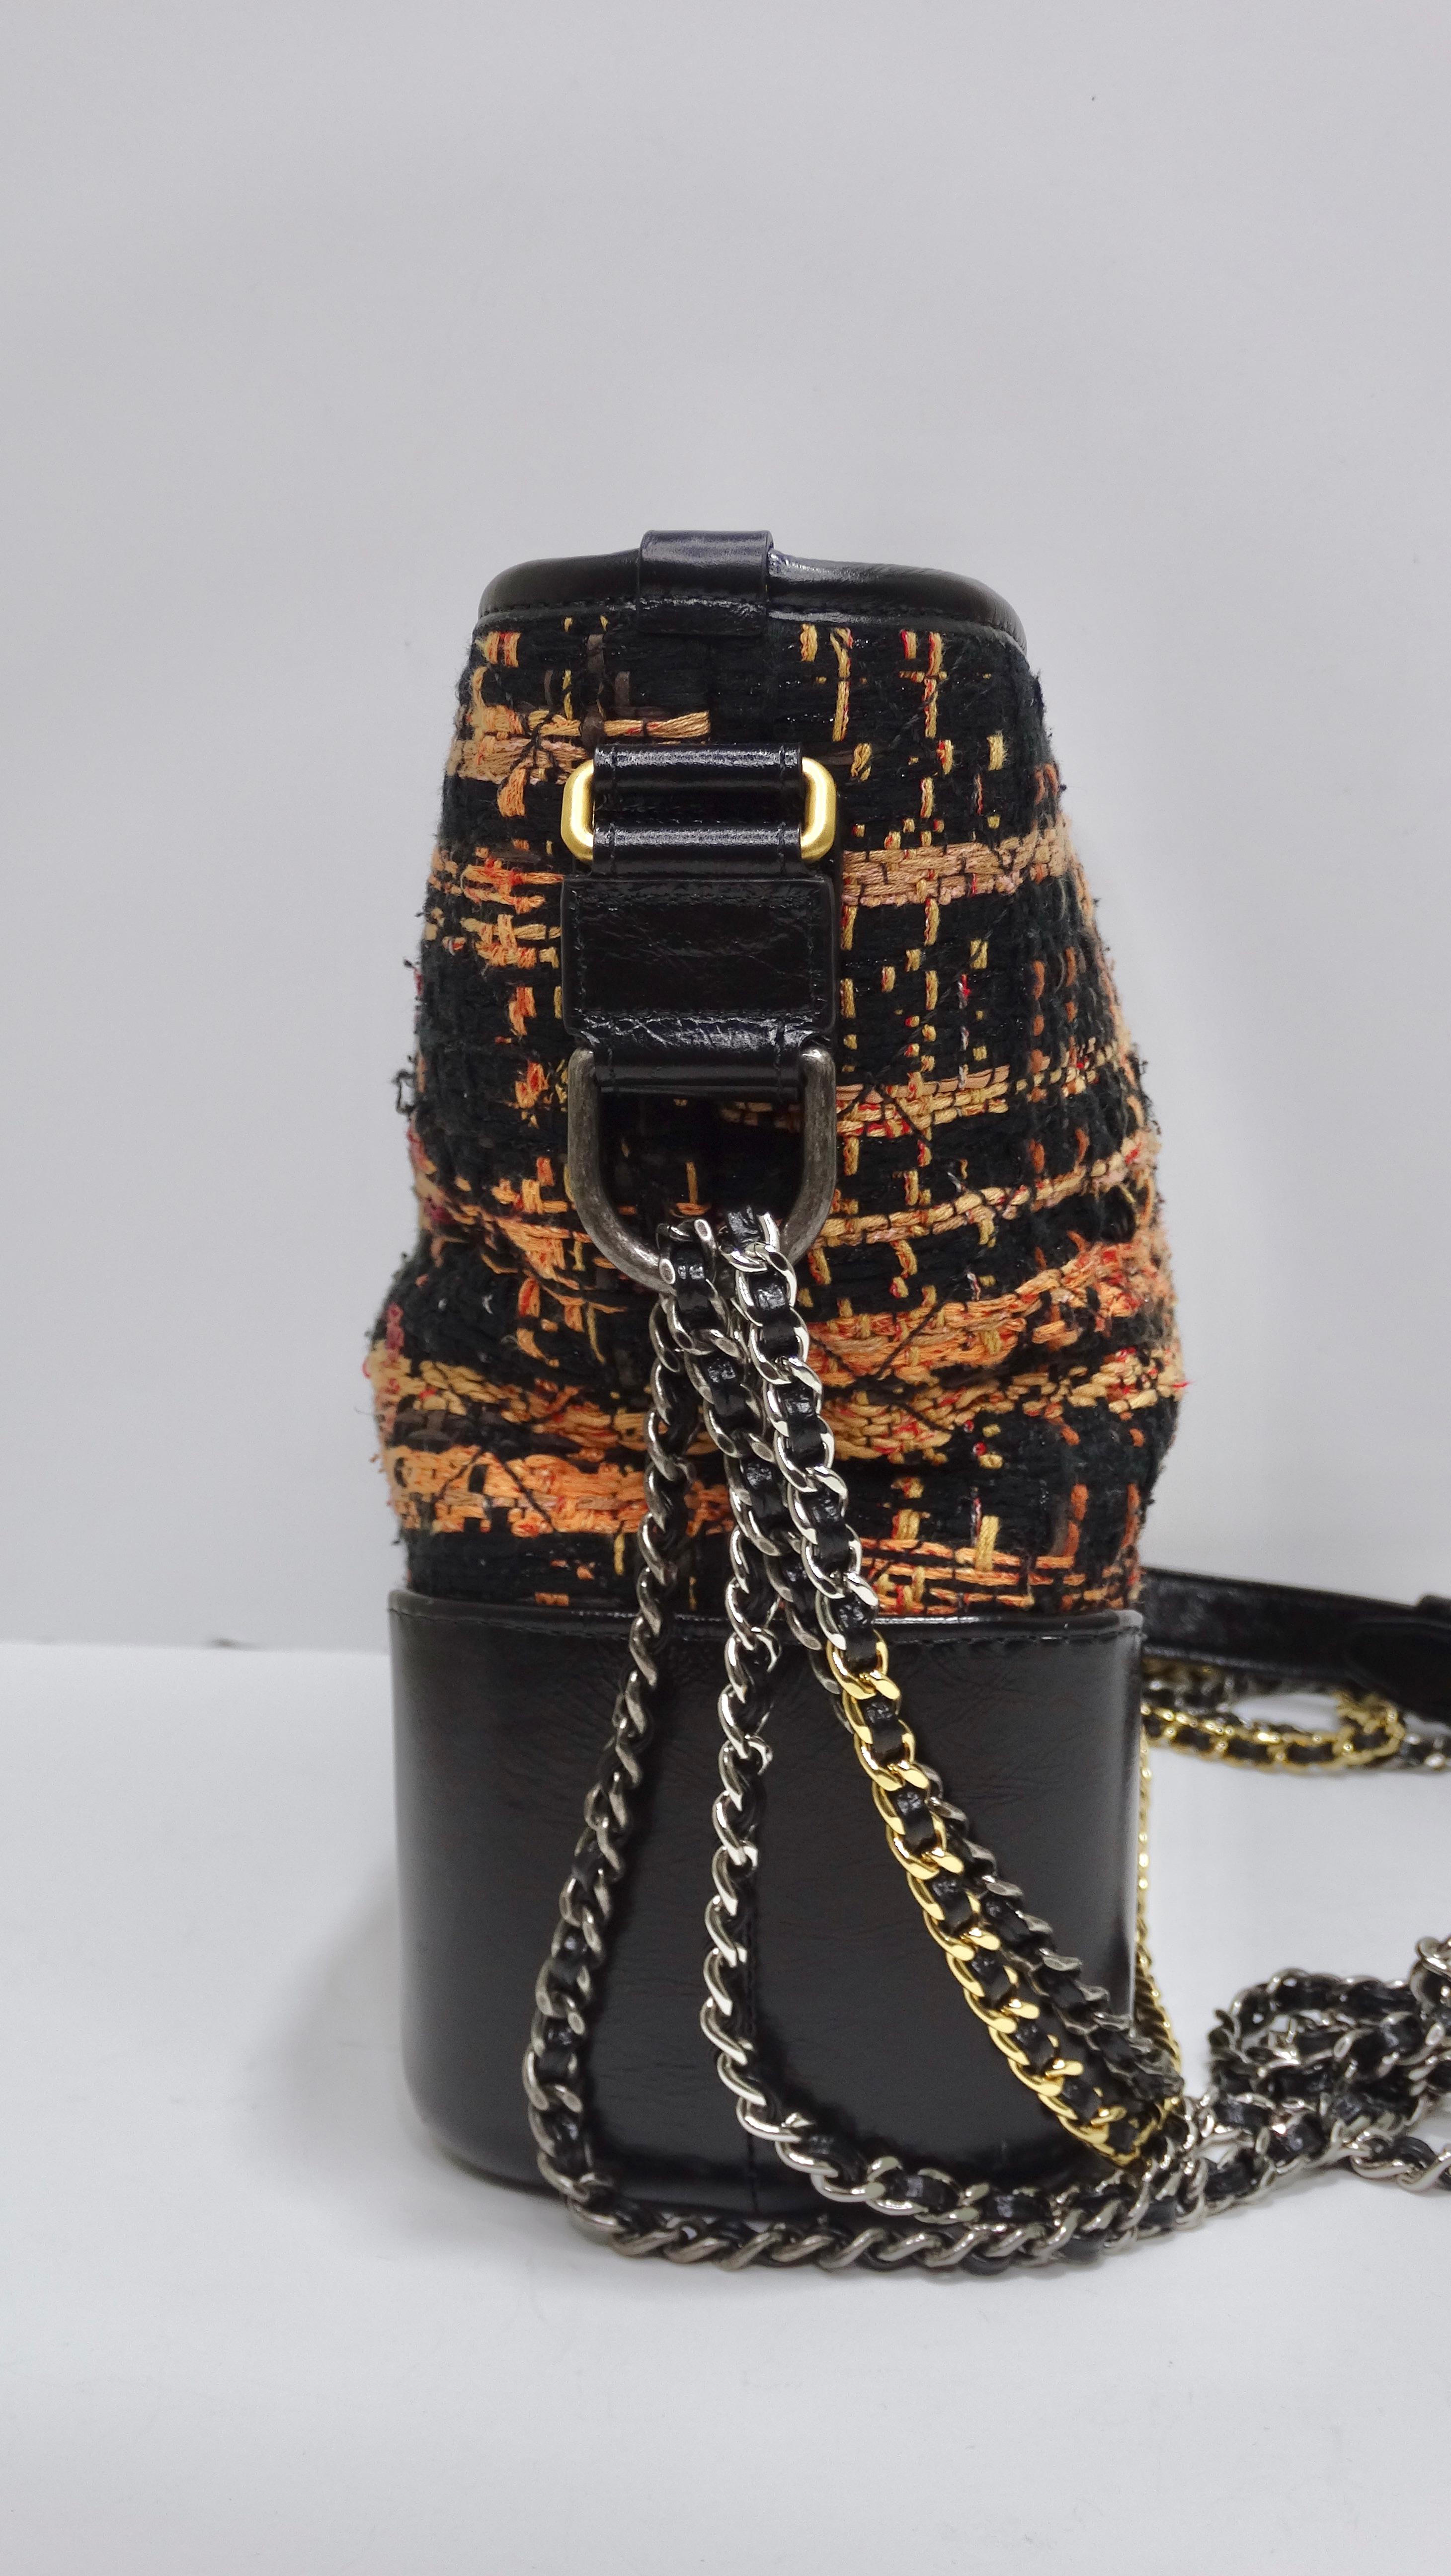 CHANEL Black/Peach Tweed and Leather Medium Gabrielle Hobo Bag In Good Condition For Sale In Scottsdale, AZ